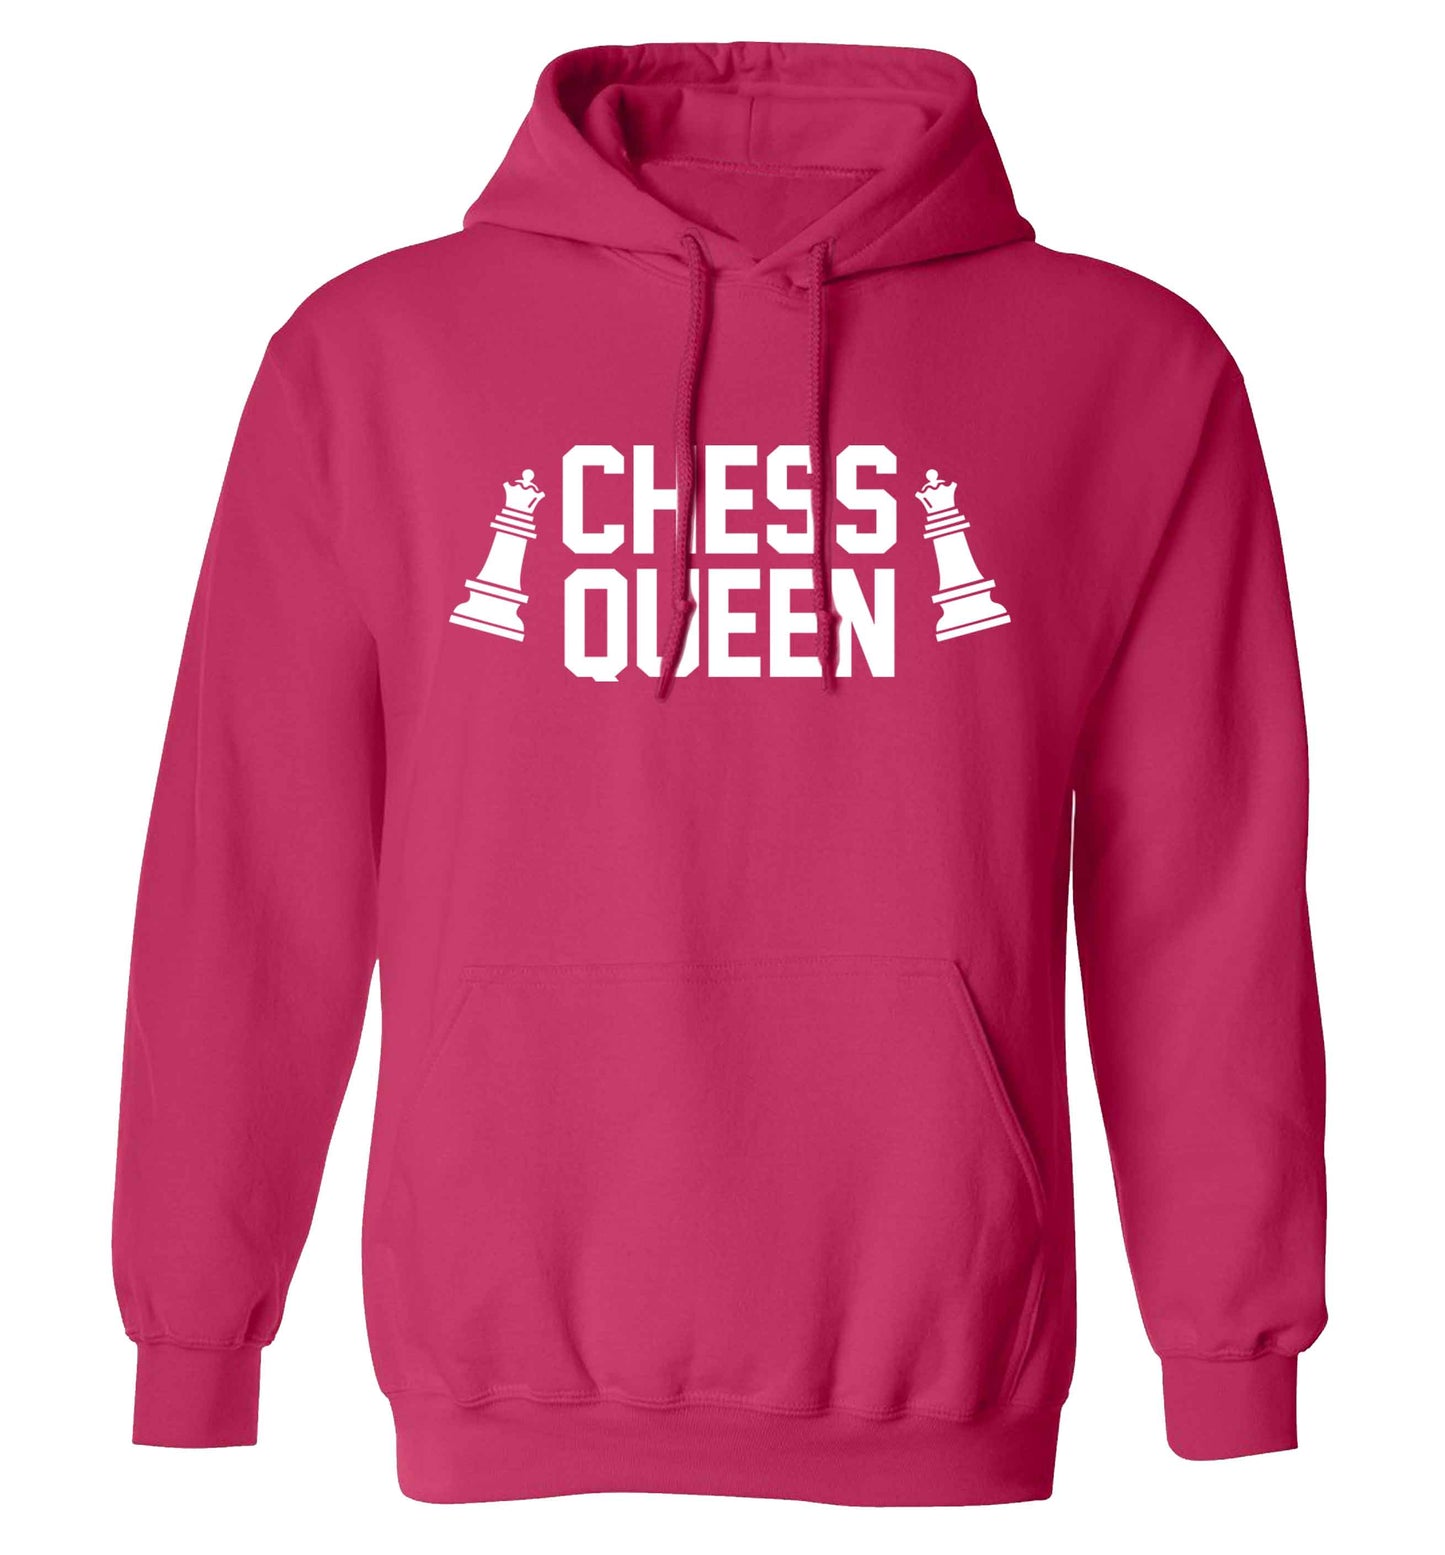 Chess queen adults unisex pink hoodie 2XL